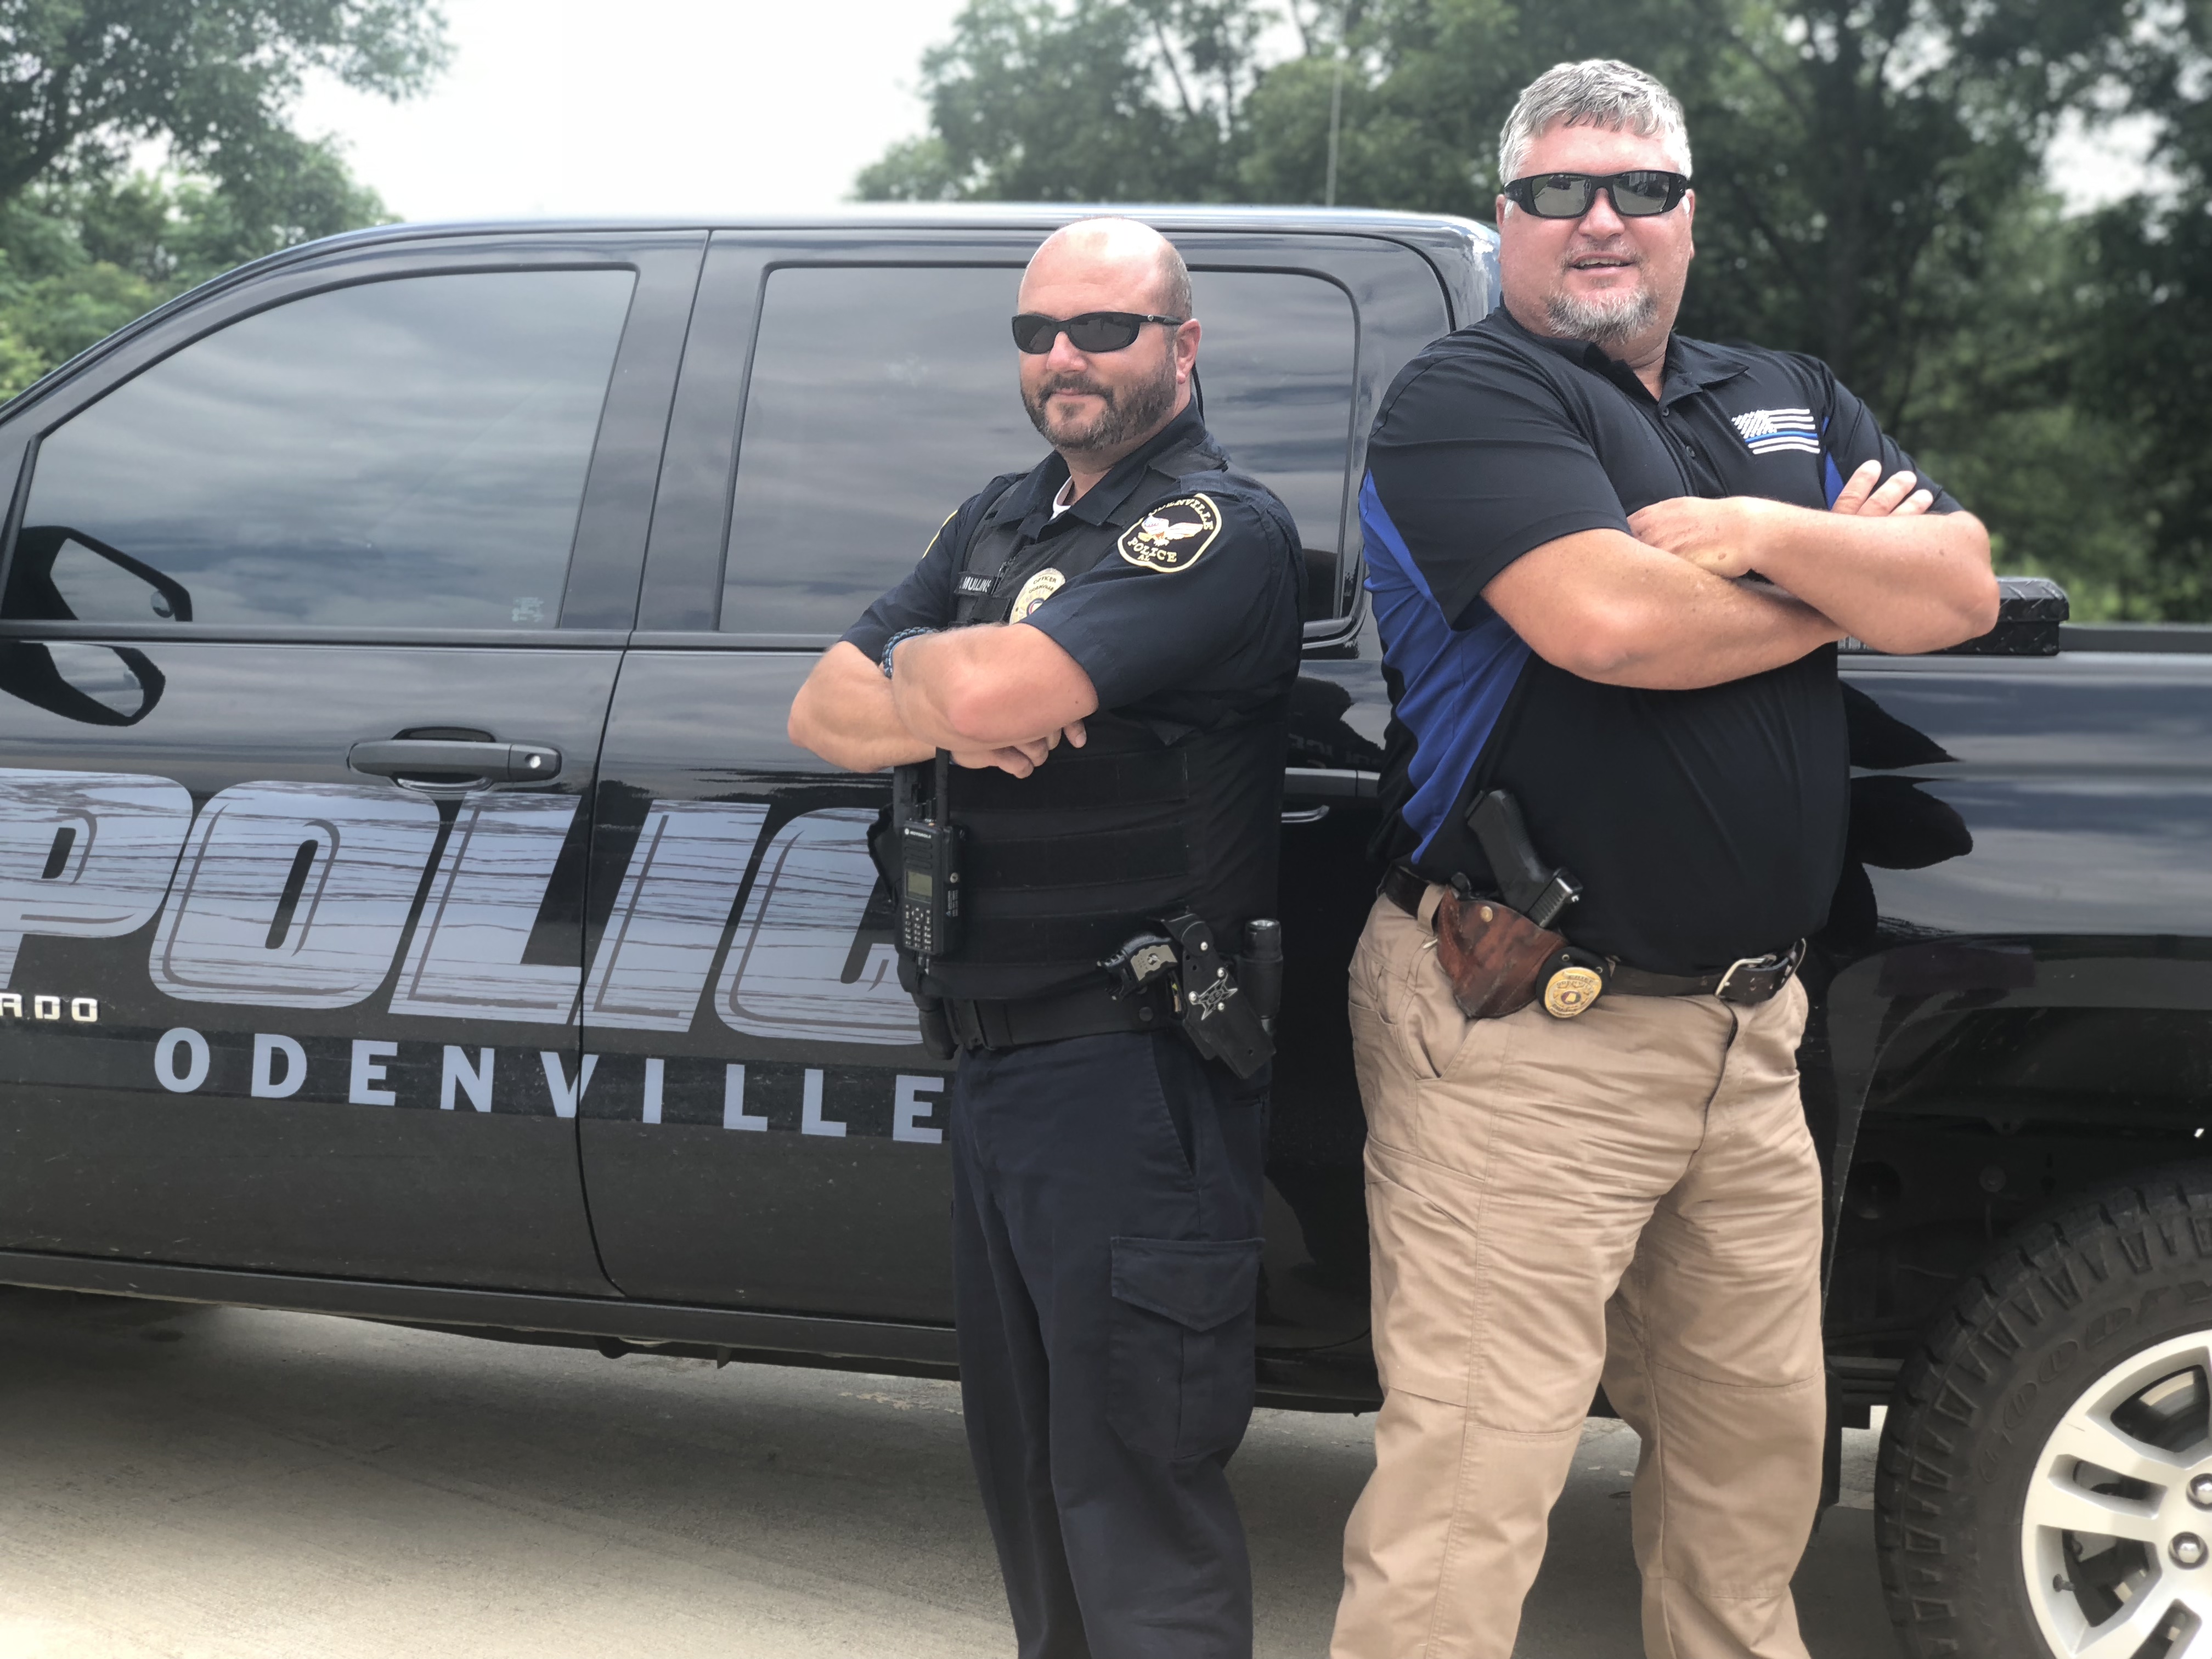 Odenville Police Department accepts lip-sync challenge; chief asks Moody, Springville to step up